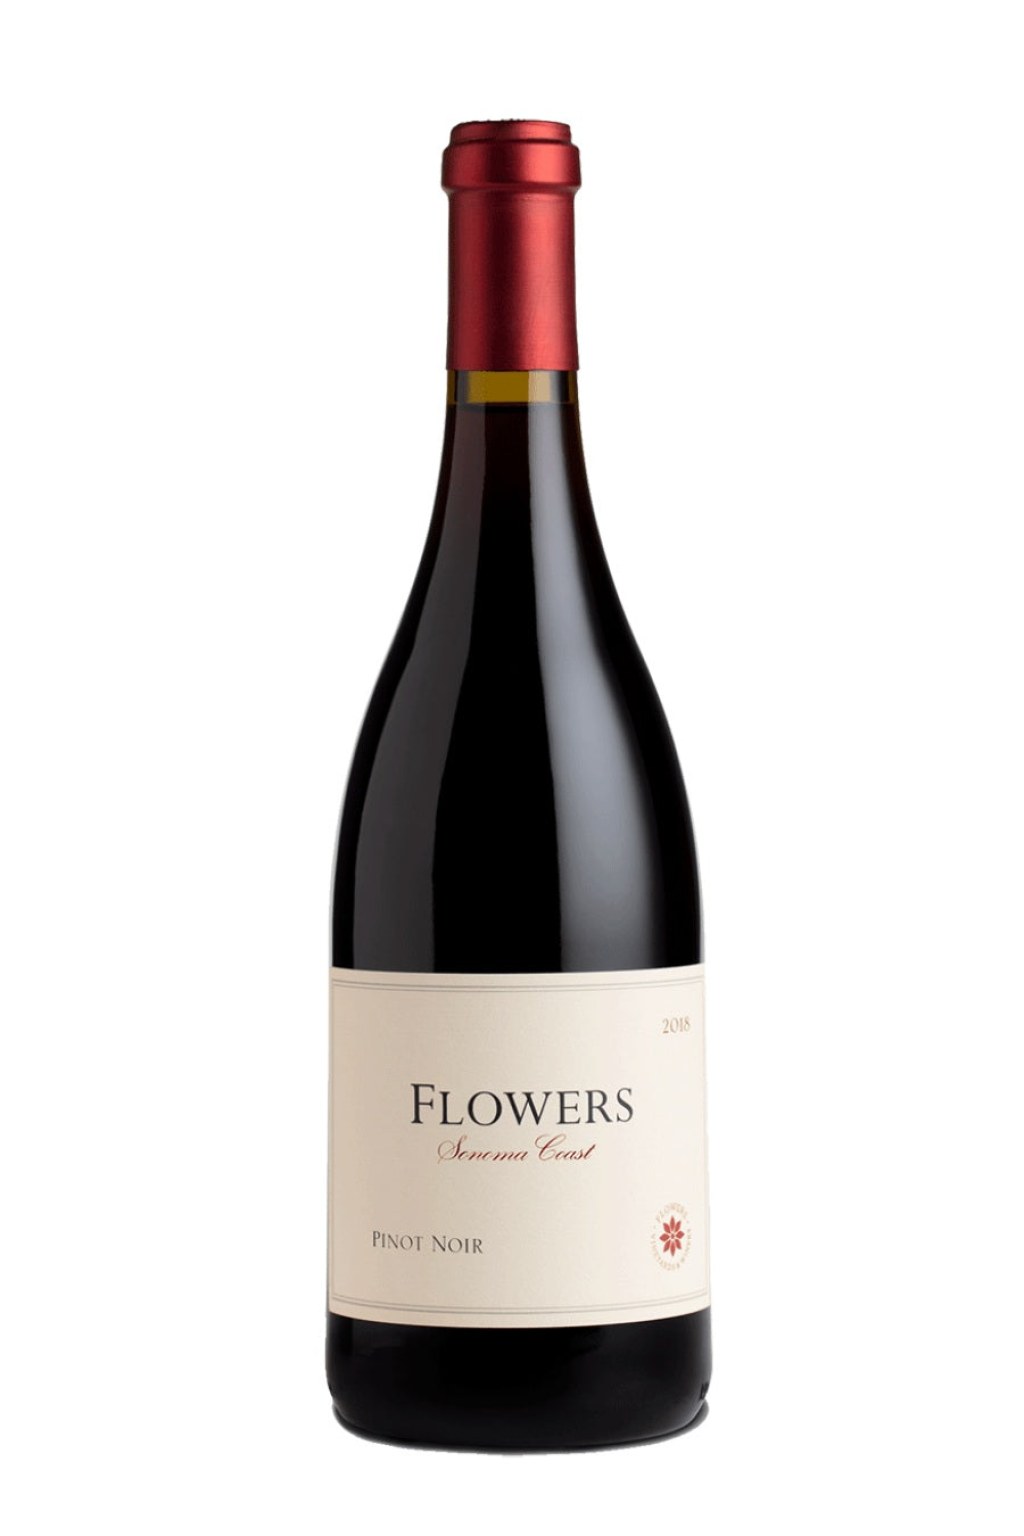 Picture of: Flowers Sonoma Coast Pinot Noir   Elegant and Expressive Red